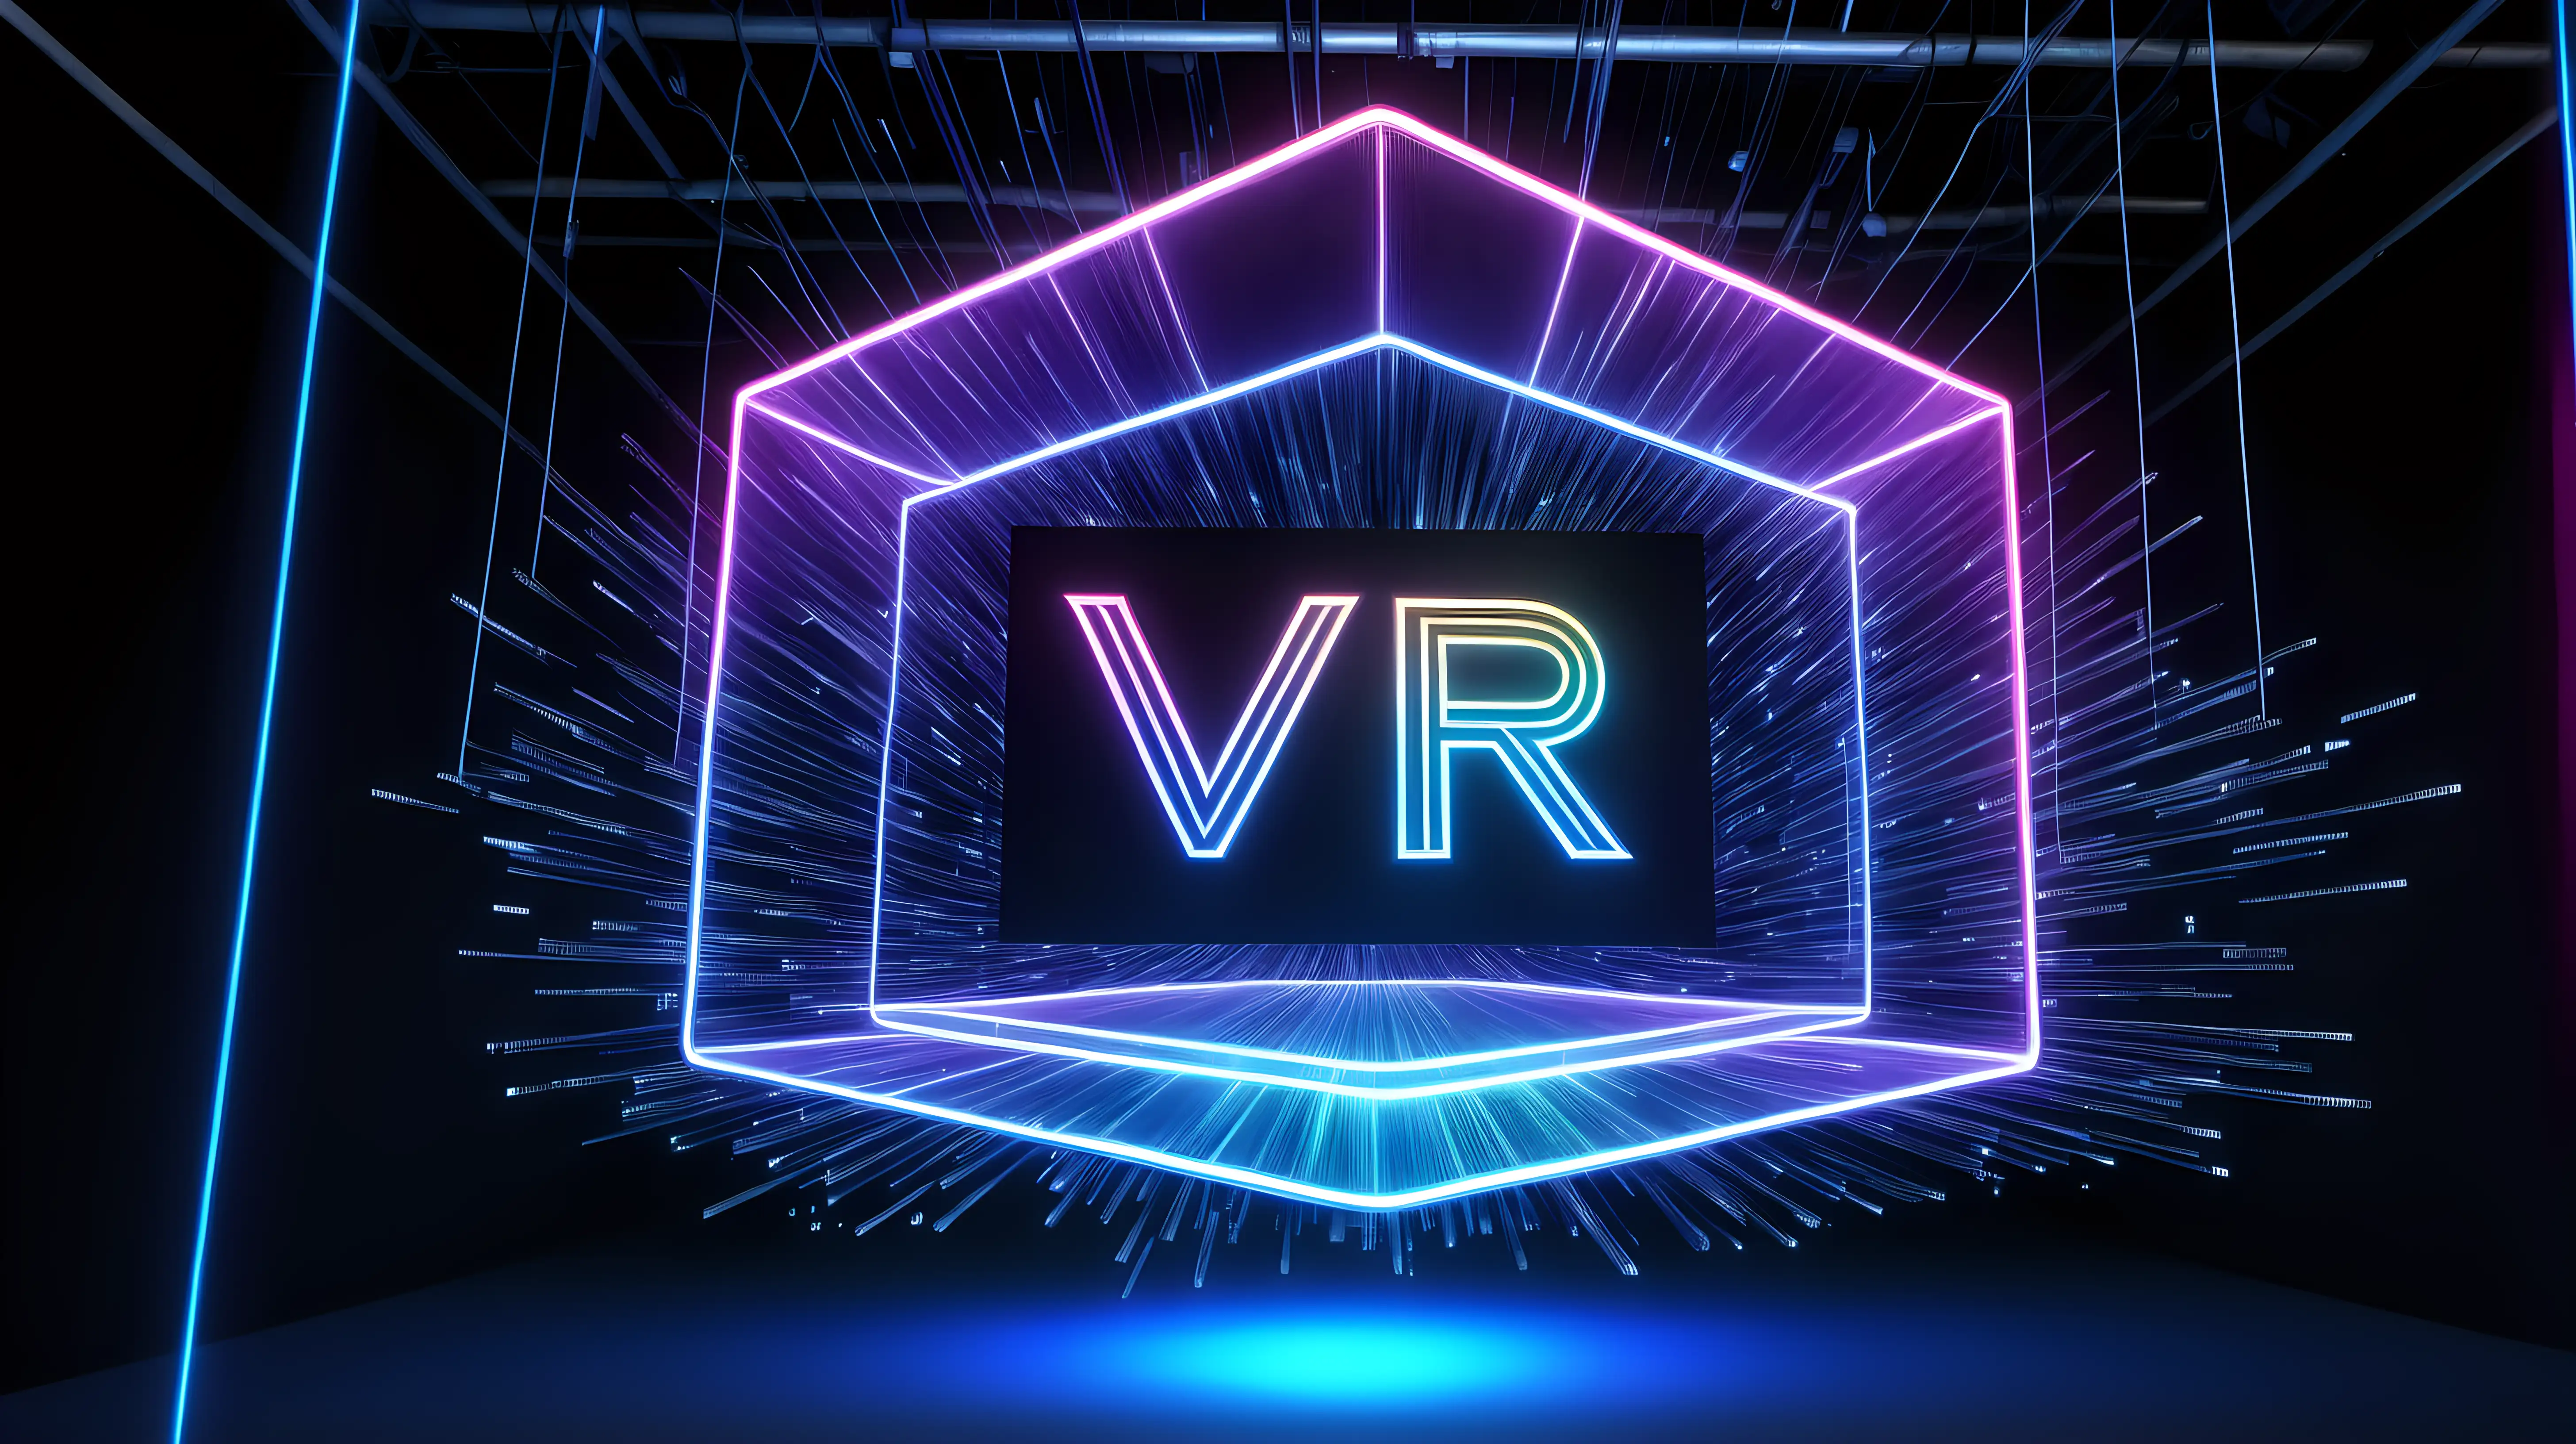 A holographic projection of "VR" suspended in mid-air amidst floating data streams and neon lights, symbolizing the cutting-edge aspects of virtual reality.